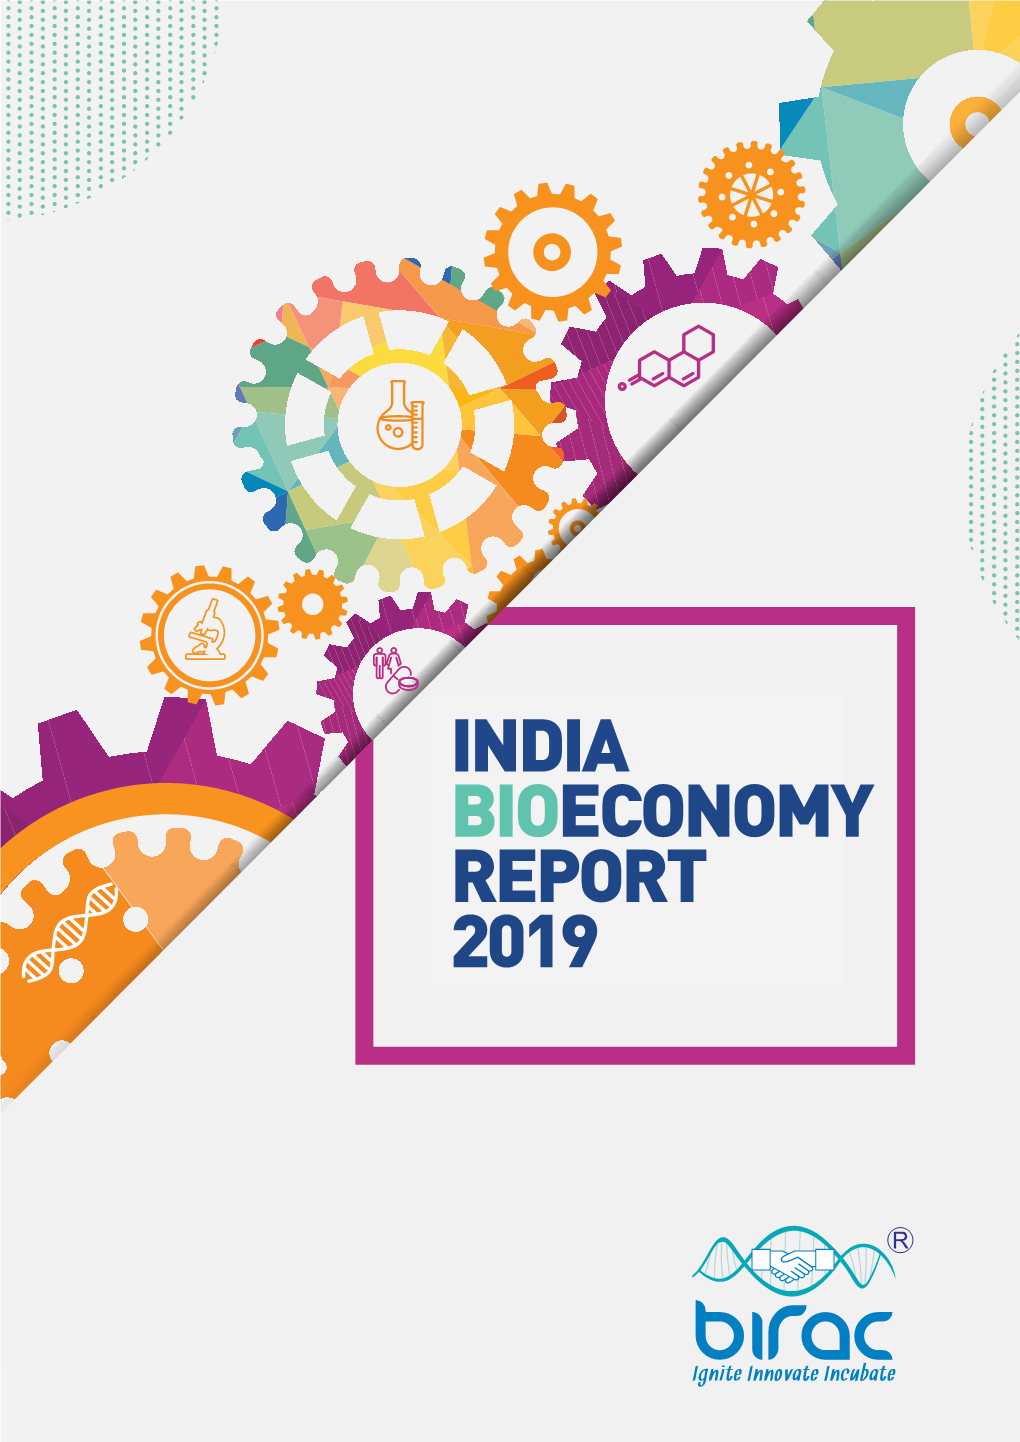 India Bioeconomy Report 2019 Is Also an Effort to Bring the Multi-Pronged Concept with Appropriate Definitions and Dimensions to the Forefront